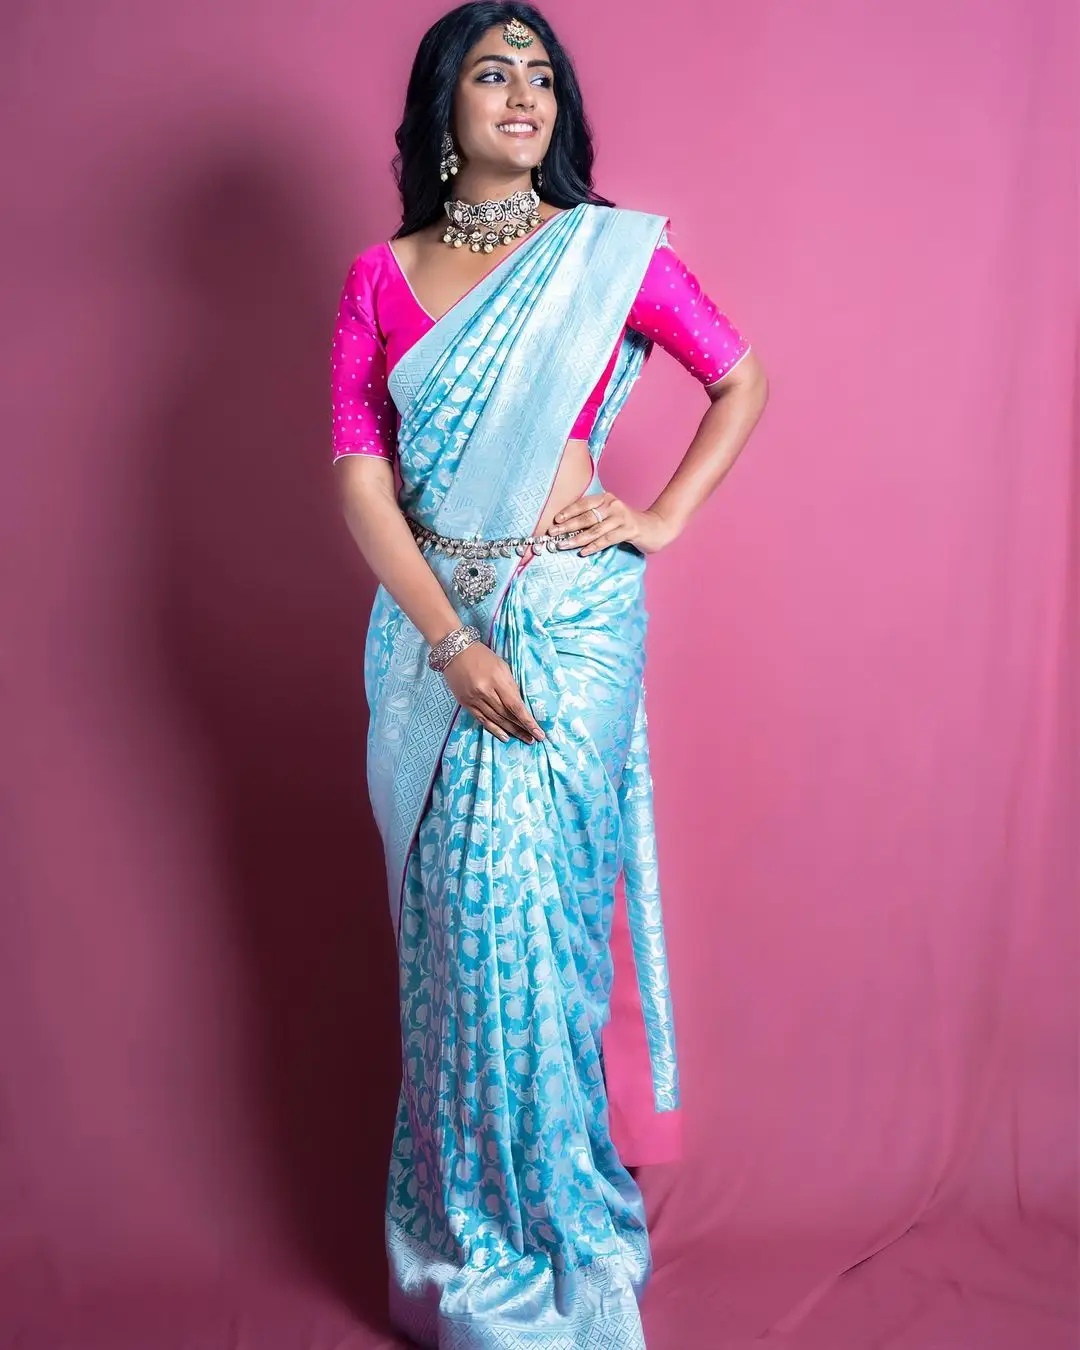 EESHA REBBA IN SOUTH INDIAN TRADITIONAL BLUE SAREE PINK BLOUSE 6